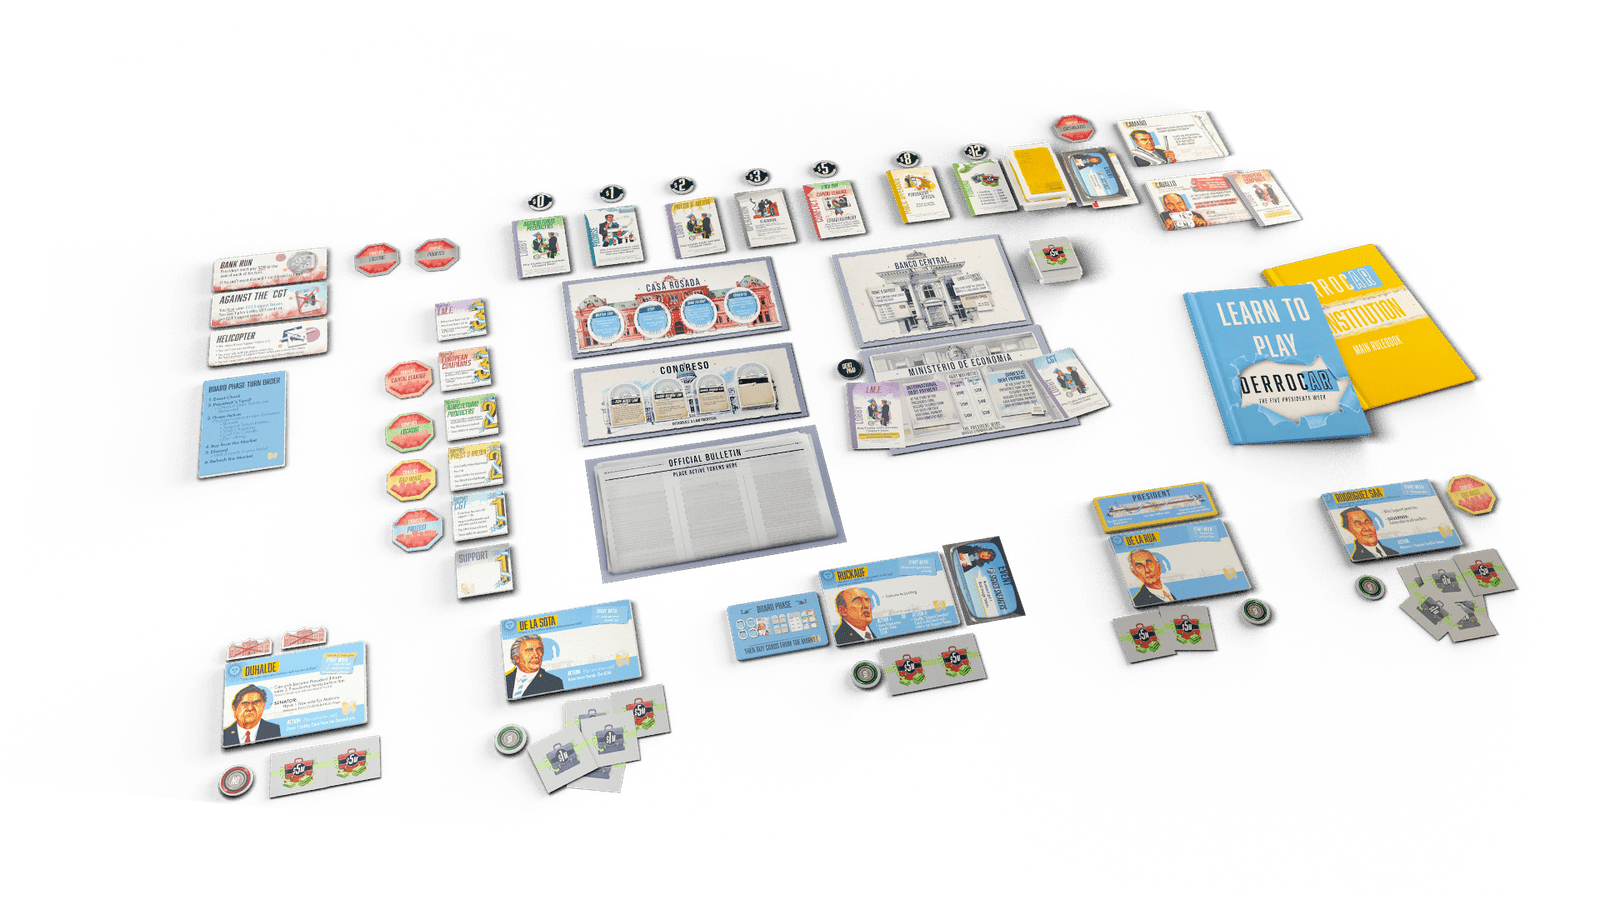 Derrocar board game - Comprehensive overview of game components displayed in the playing position